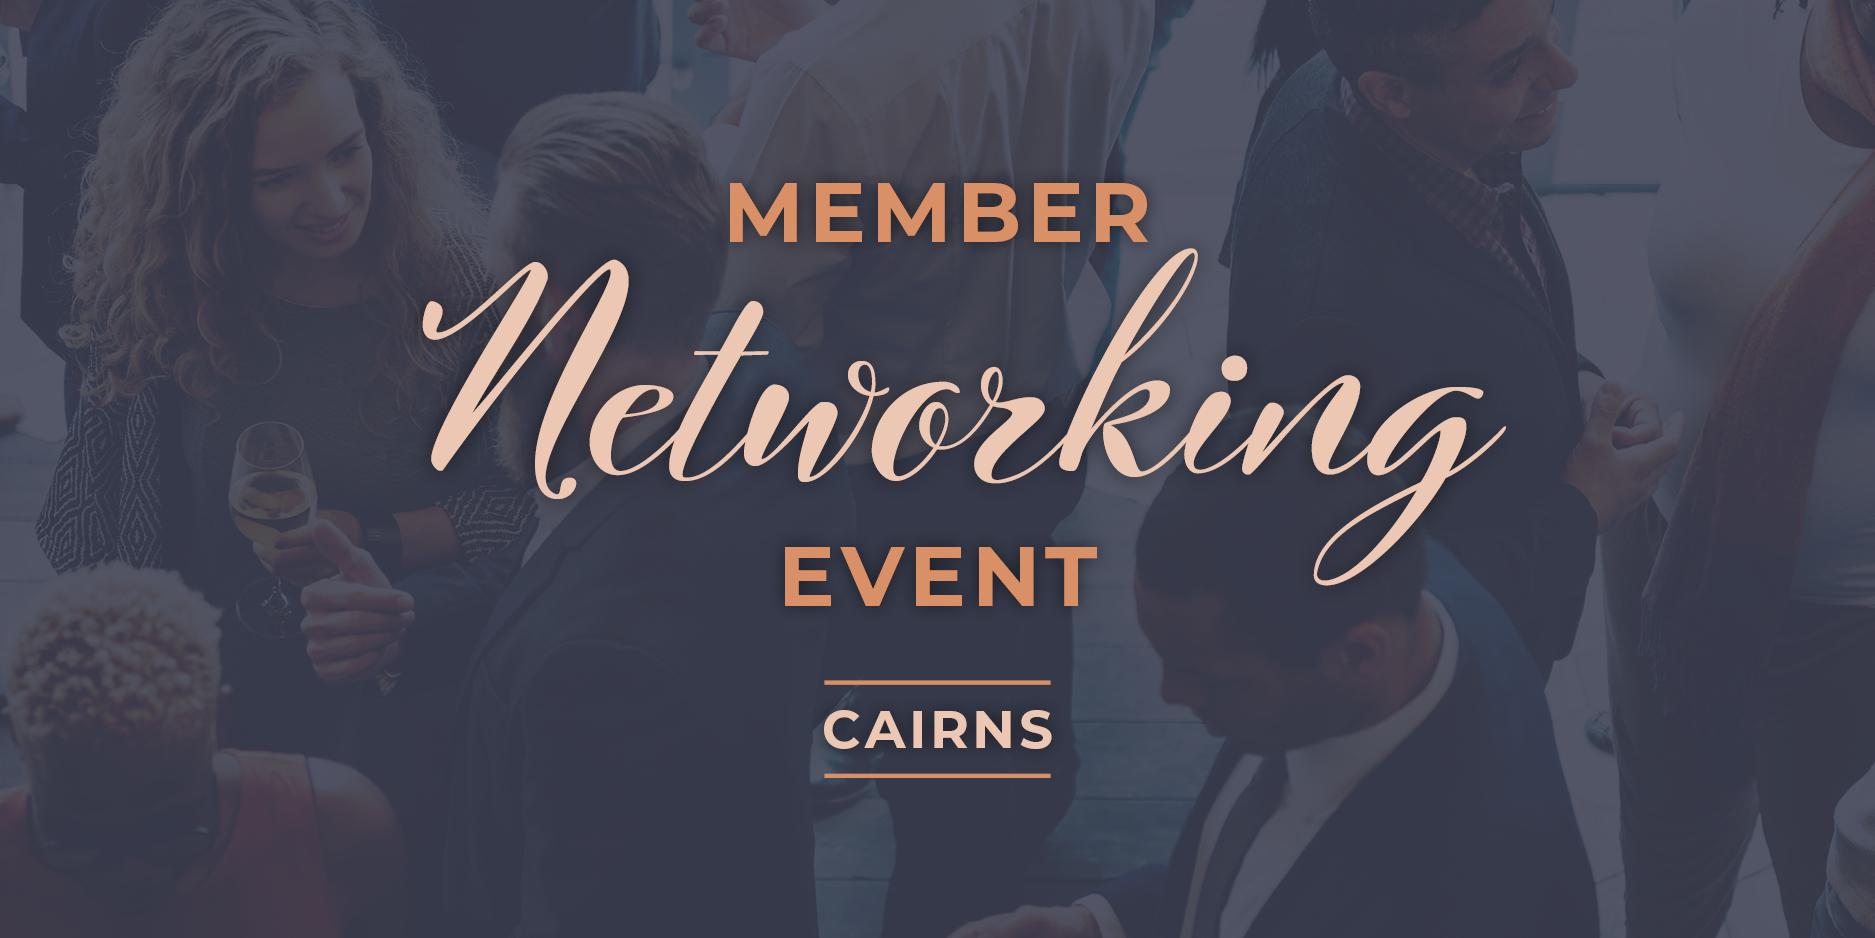 Member networking event - Cairns